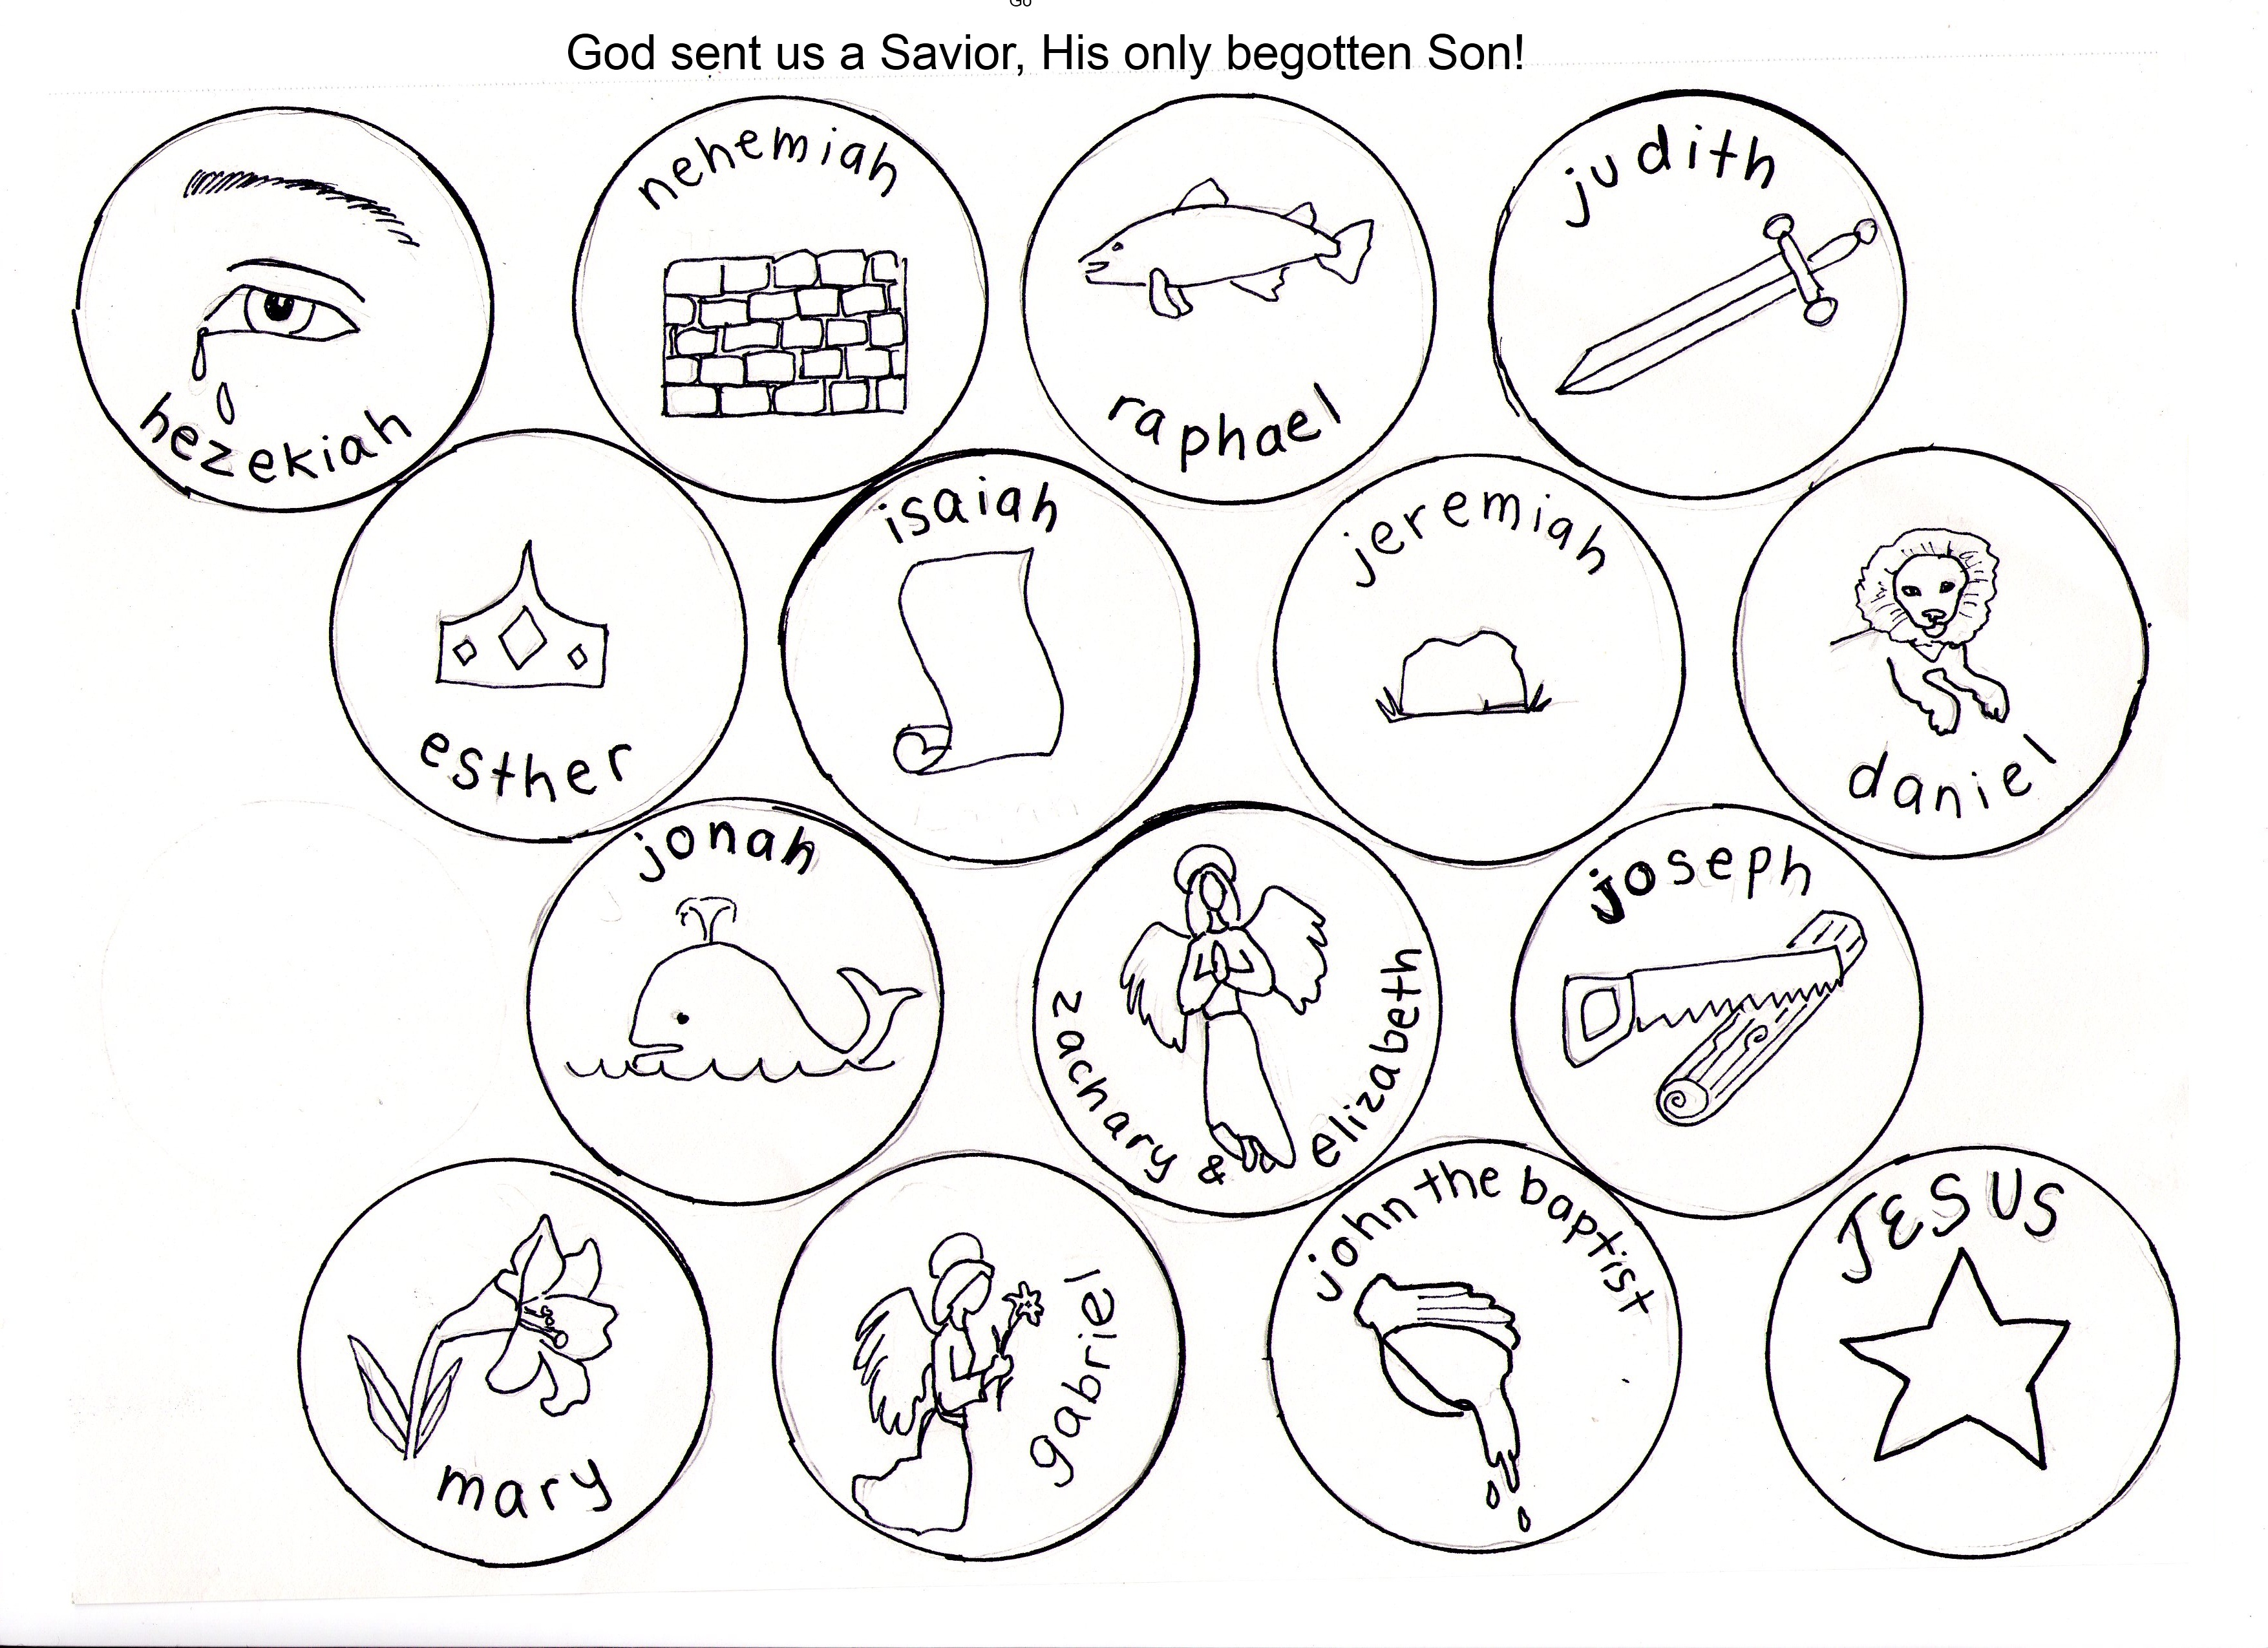 Jesse Tree Symbols Coloring Pages Sketch Coloring Page